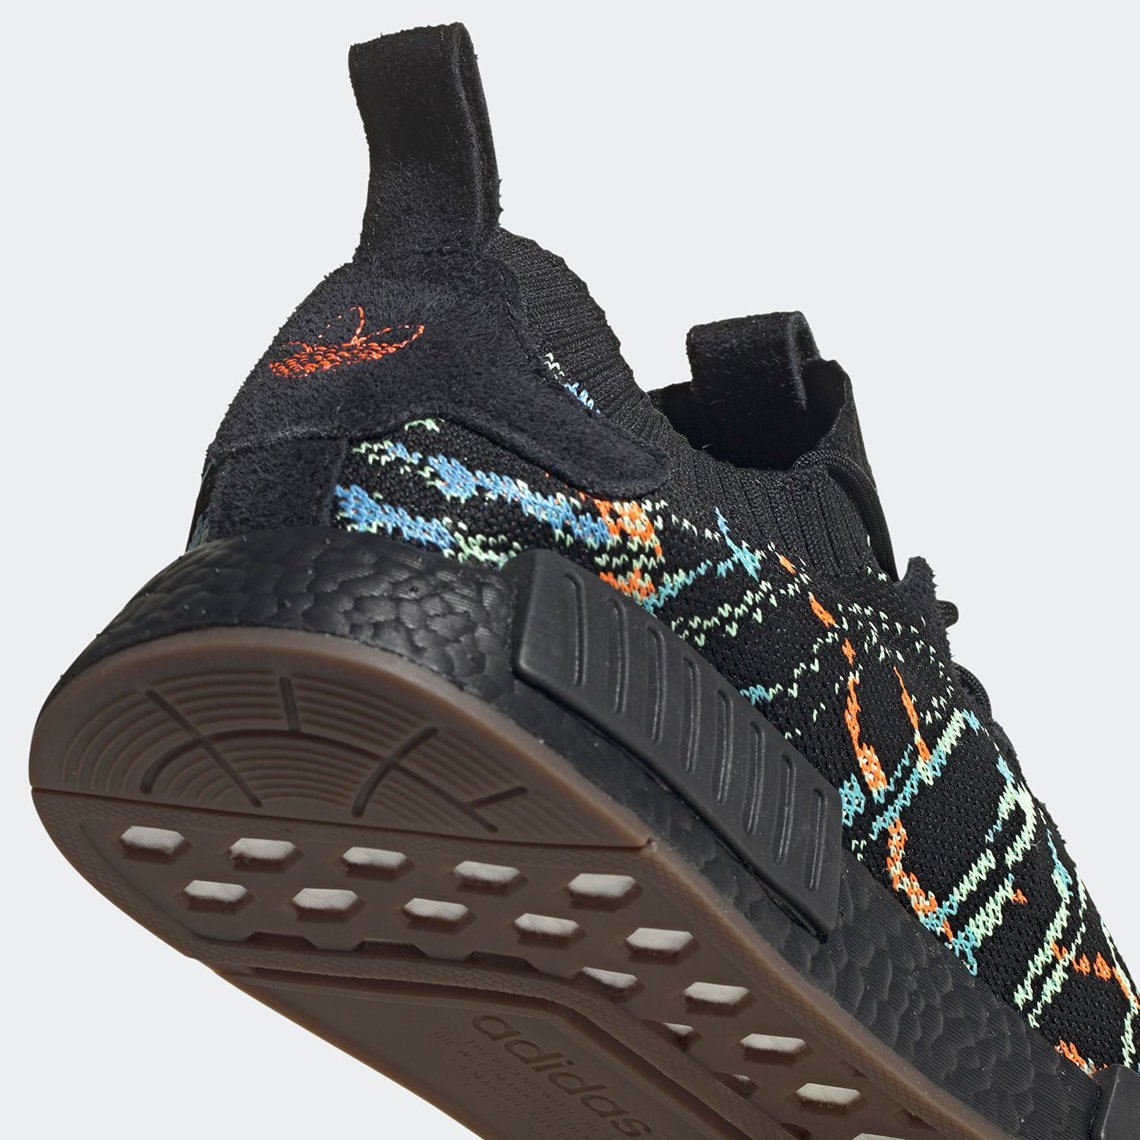 pence hale side adidas NMD R1 PK Glitch G57941 Release Date | SneakerNews.com